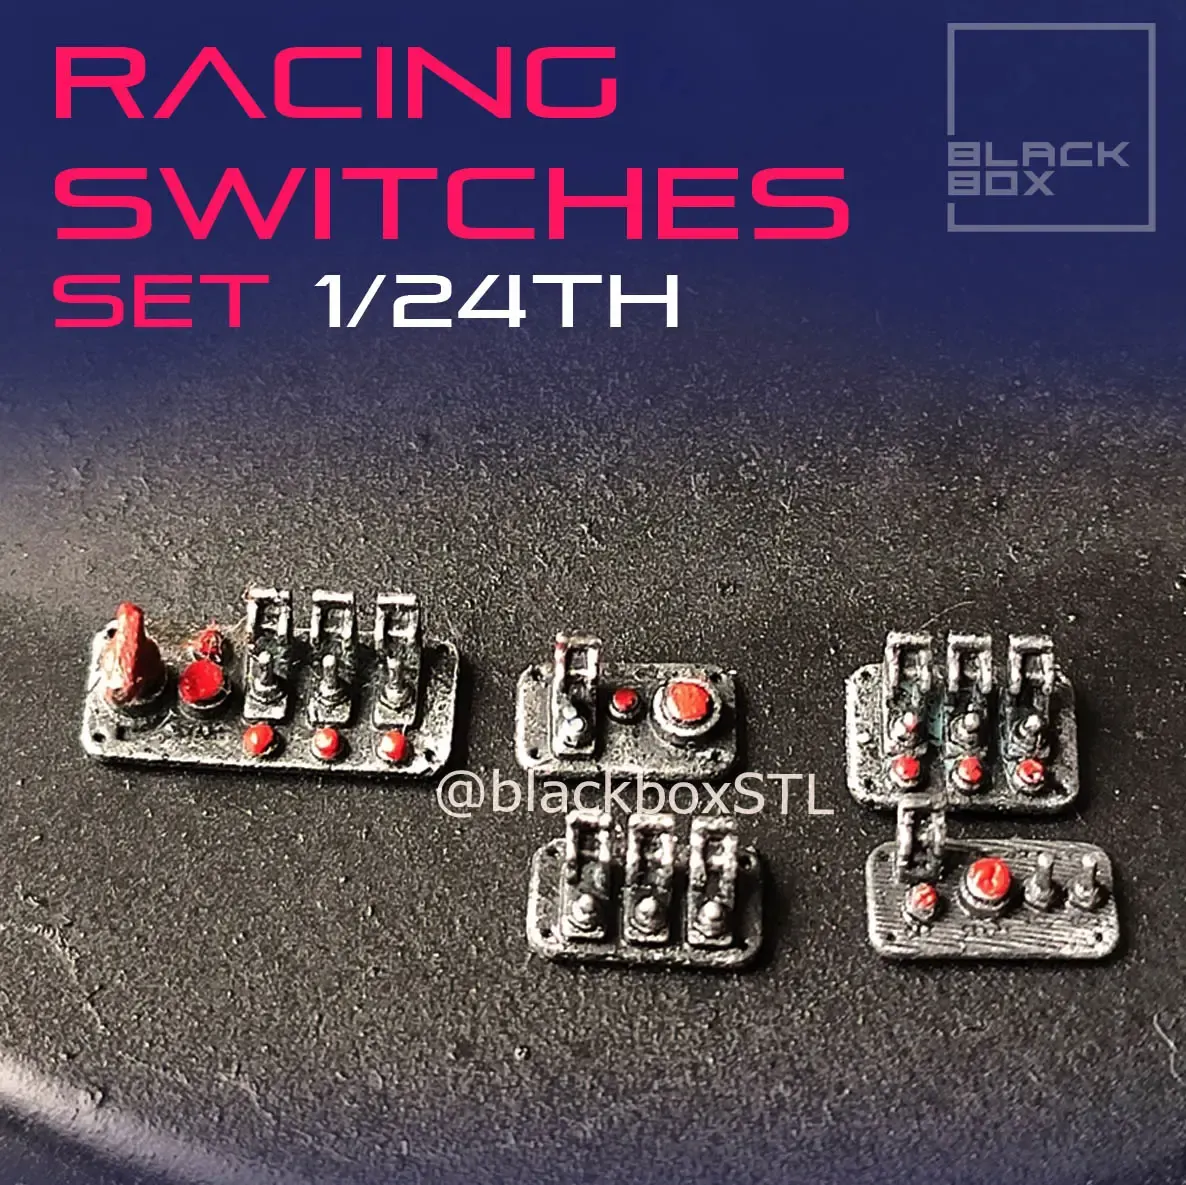 Racing Switches Set for modelkit and diecast 1-24th scale